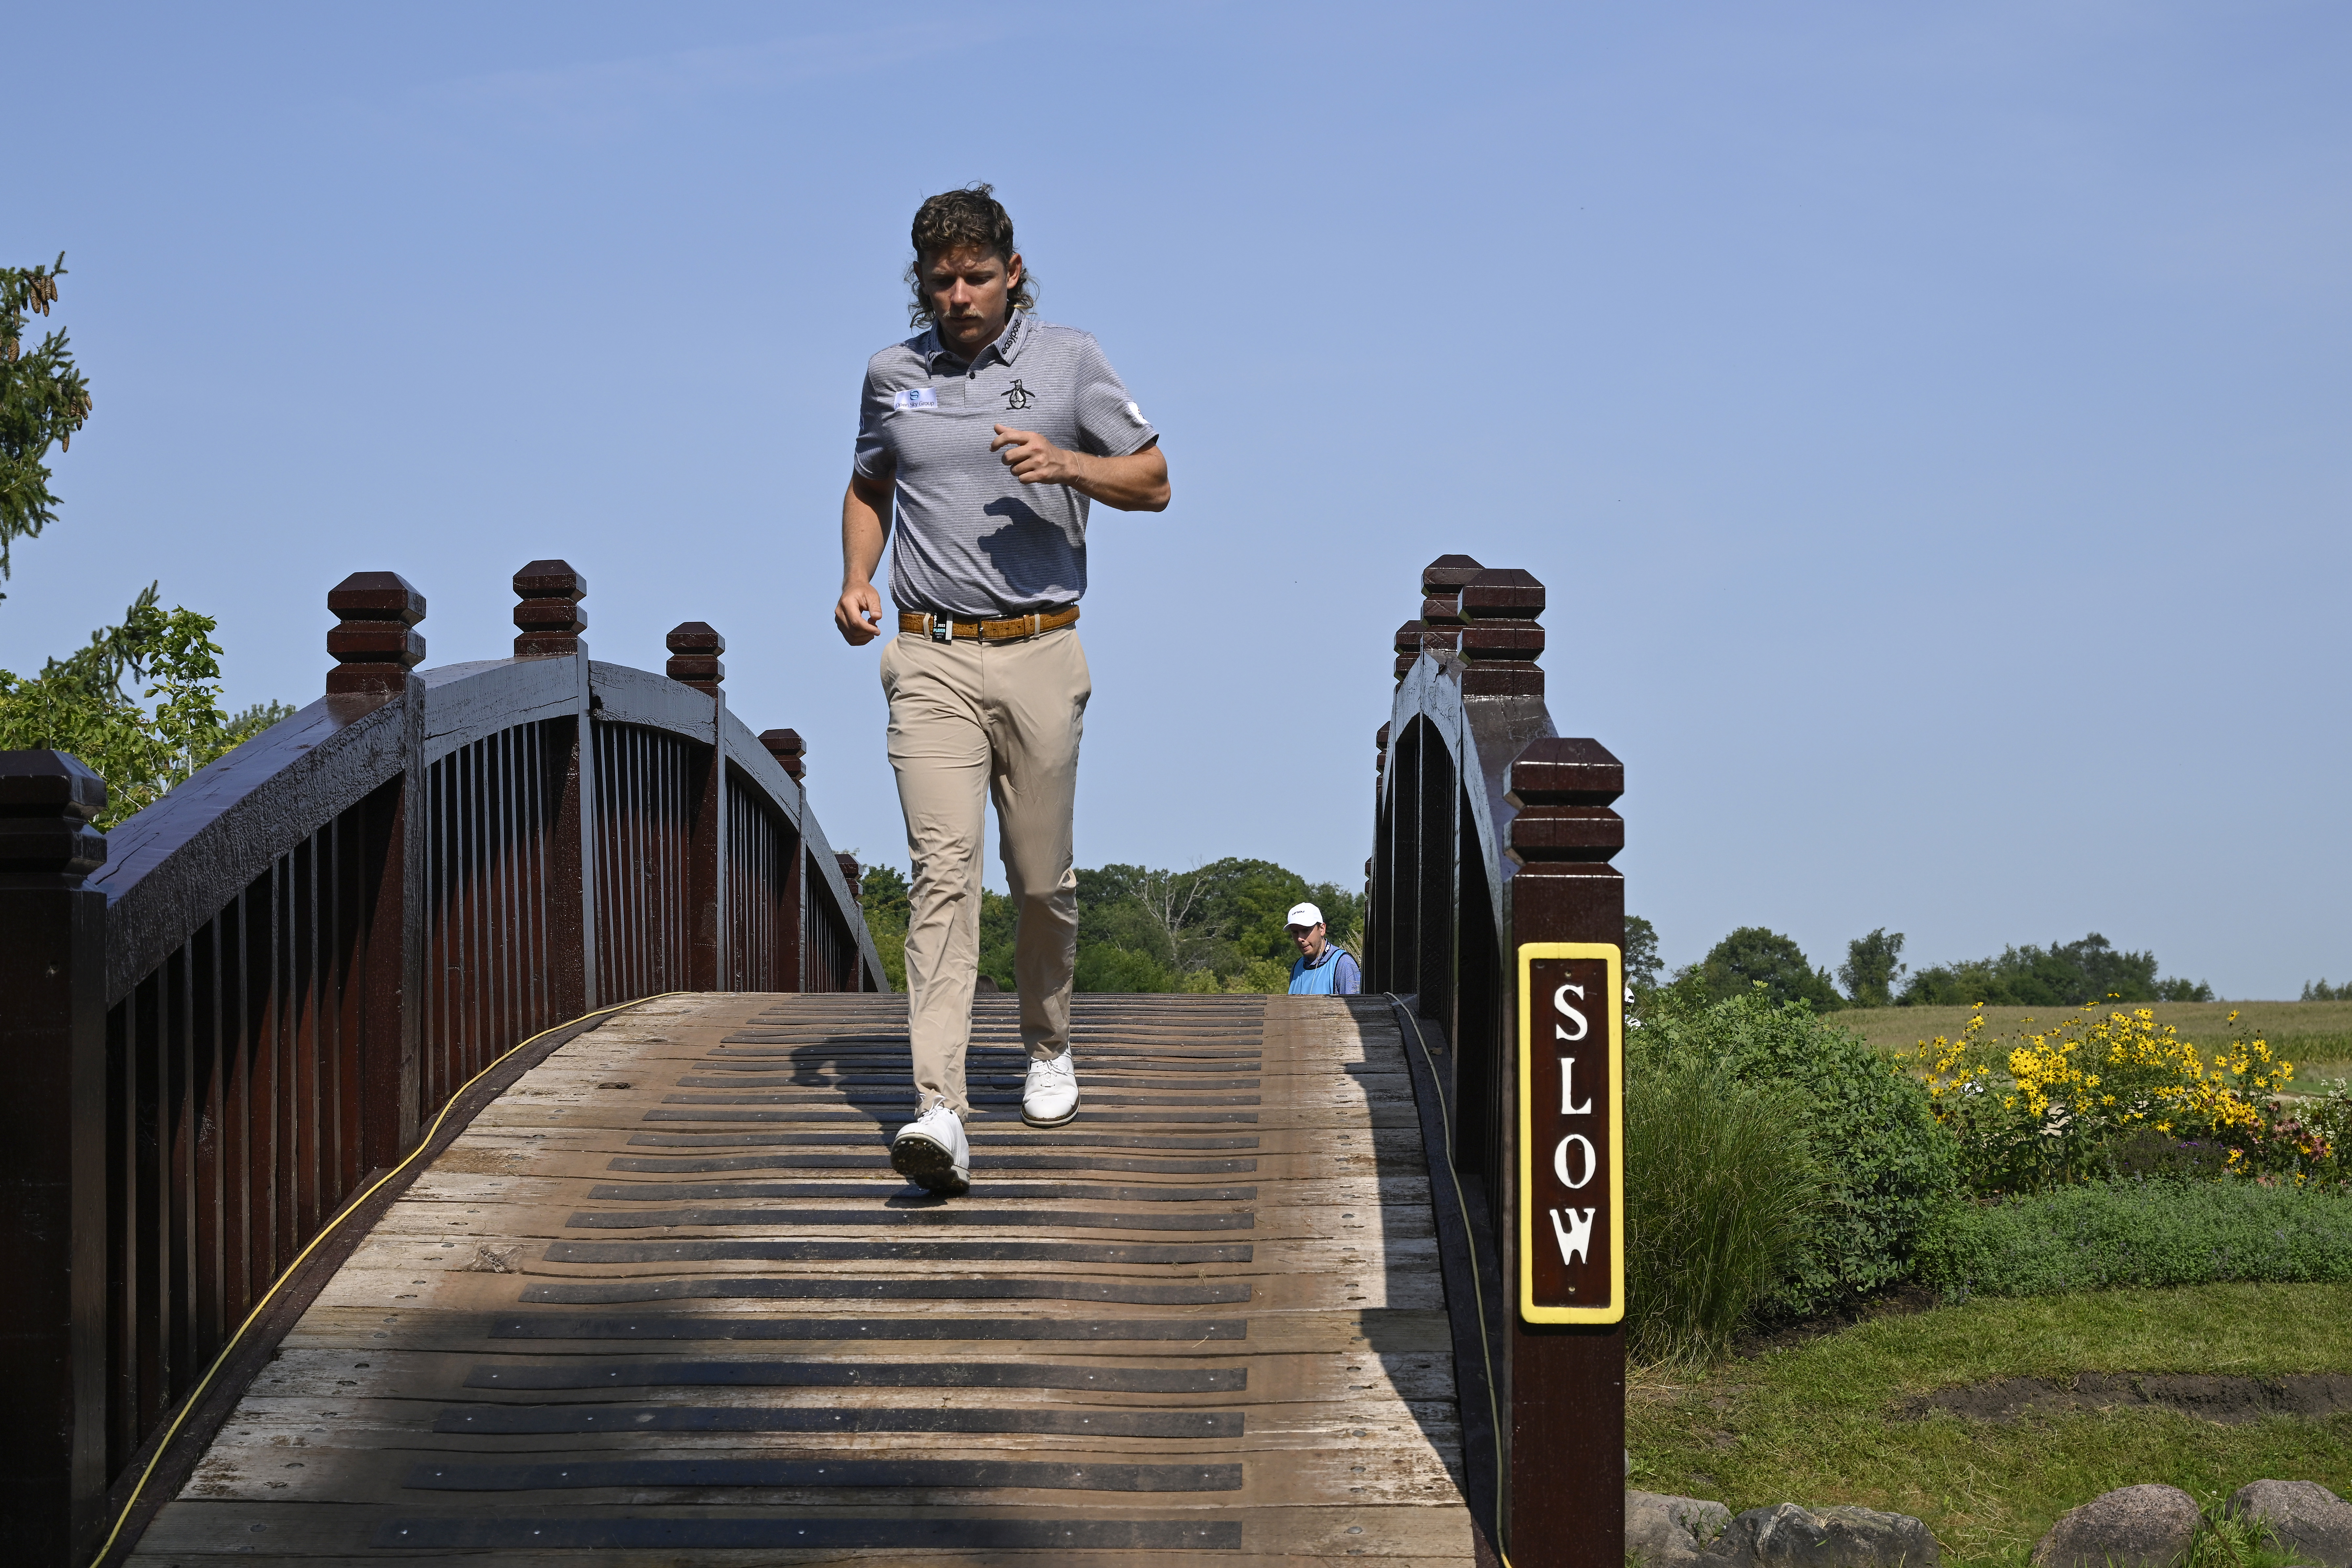 Team Captain Cameron Smith of Punch GC crosses a bridge to the sixth tee during the pro-am prior to the LIV Golf Invitational - Chicago at Rich Harvest Farms on September 15, 2022 in Sugar Grove, Illinois.